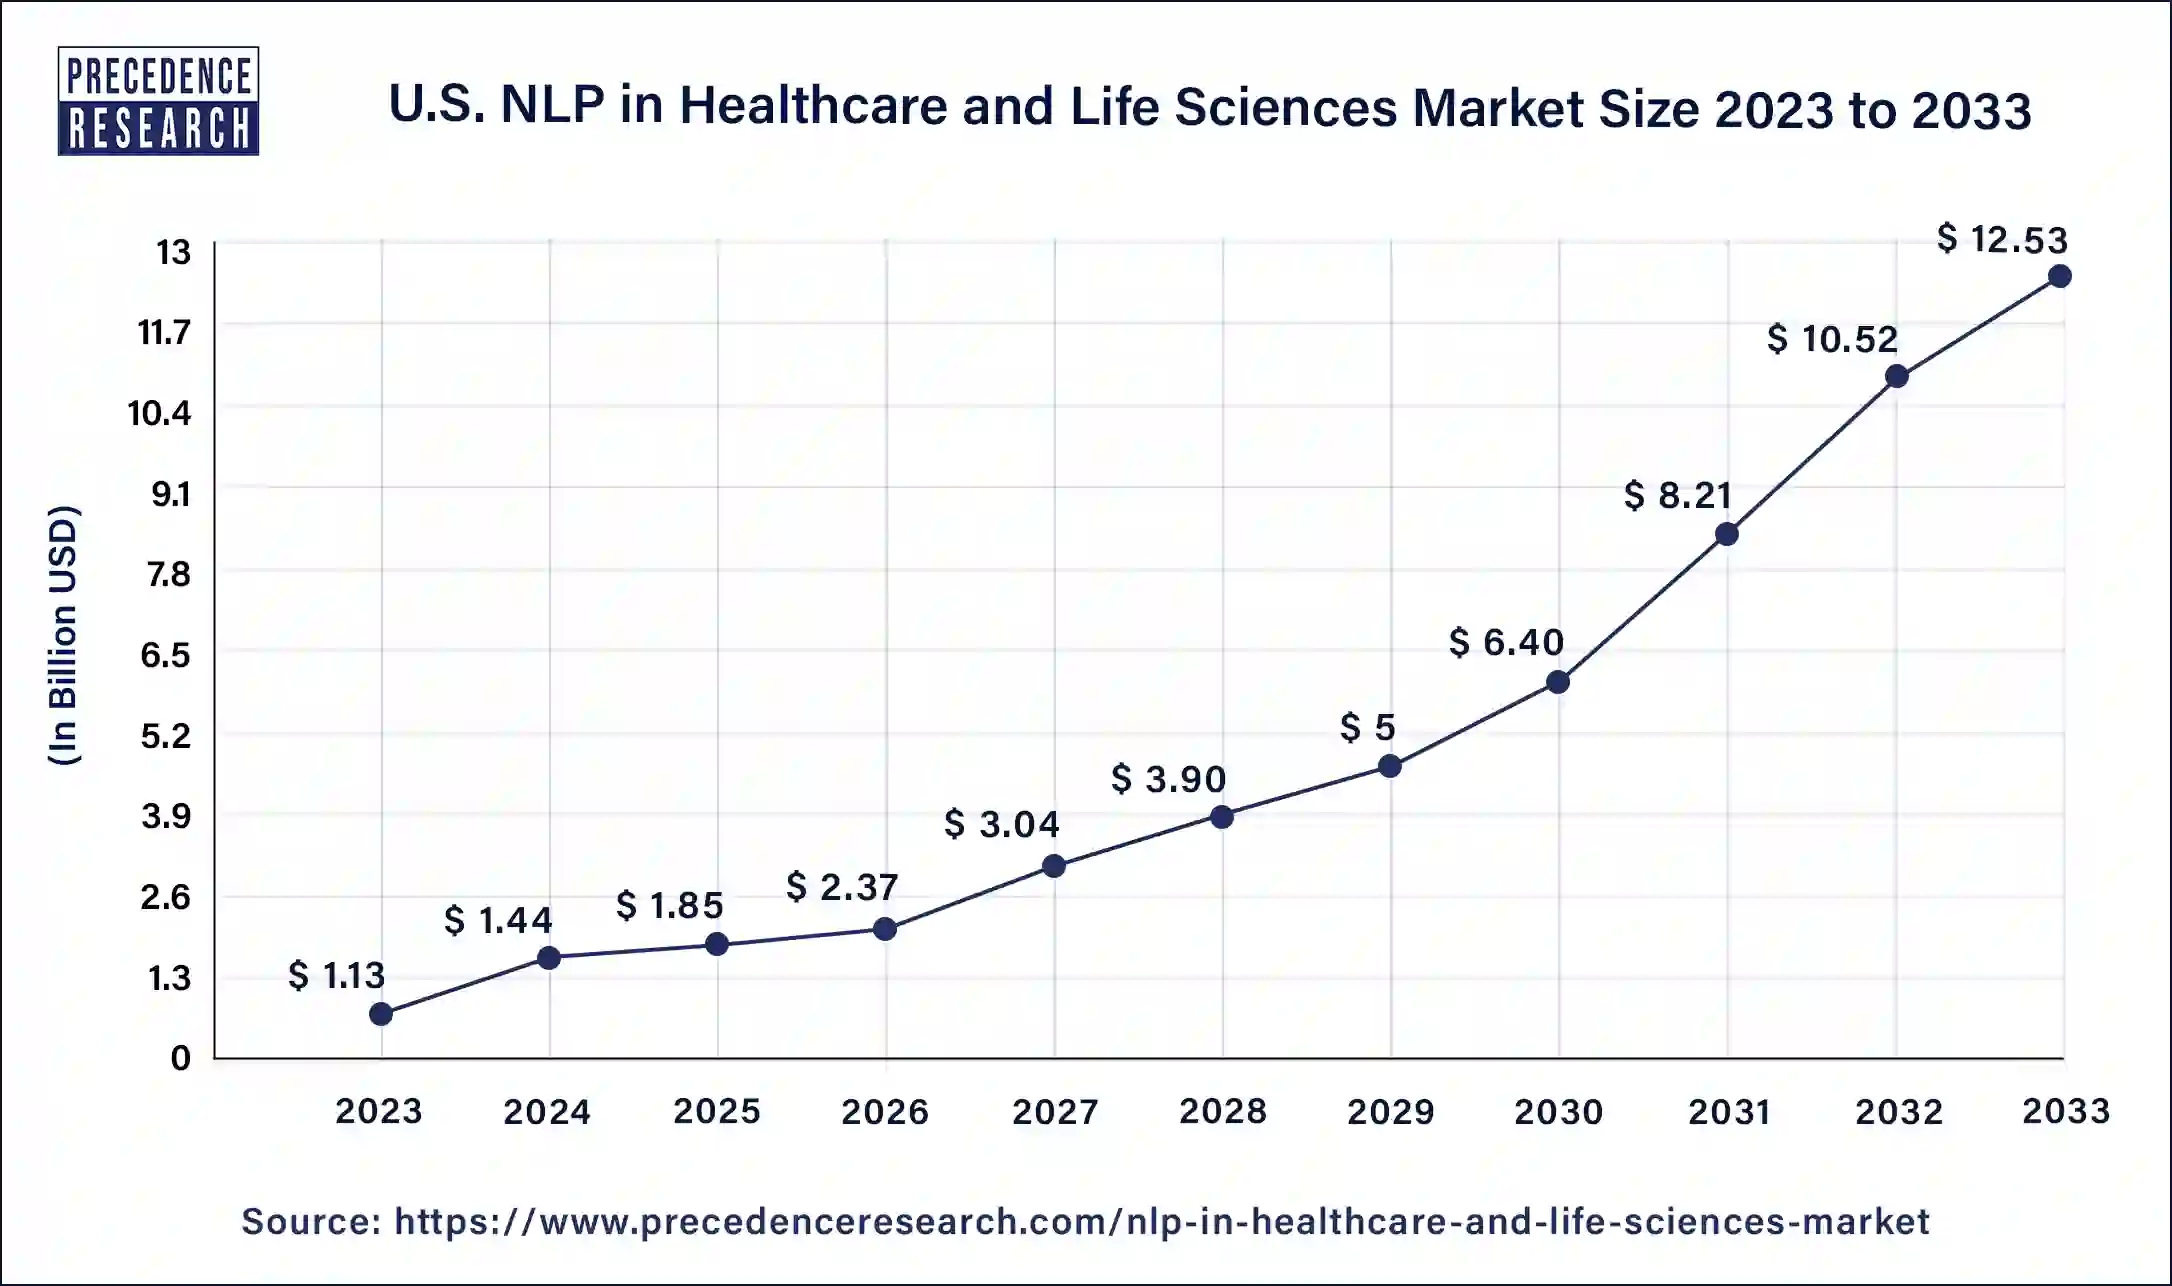 U.S. NLP in Healthcare and Life Sciences Market Size 2024 to 2033